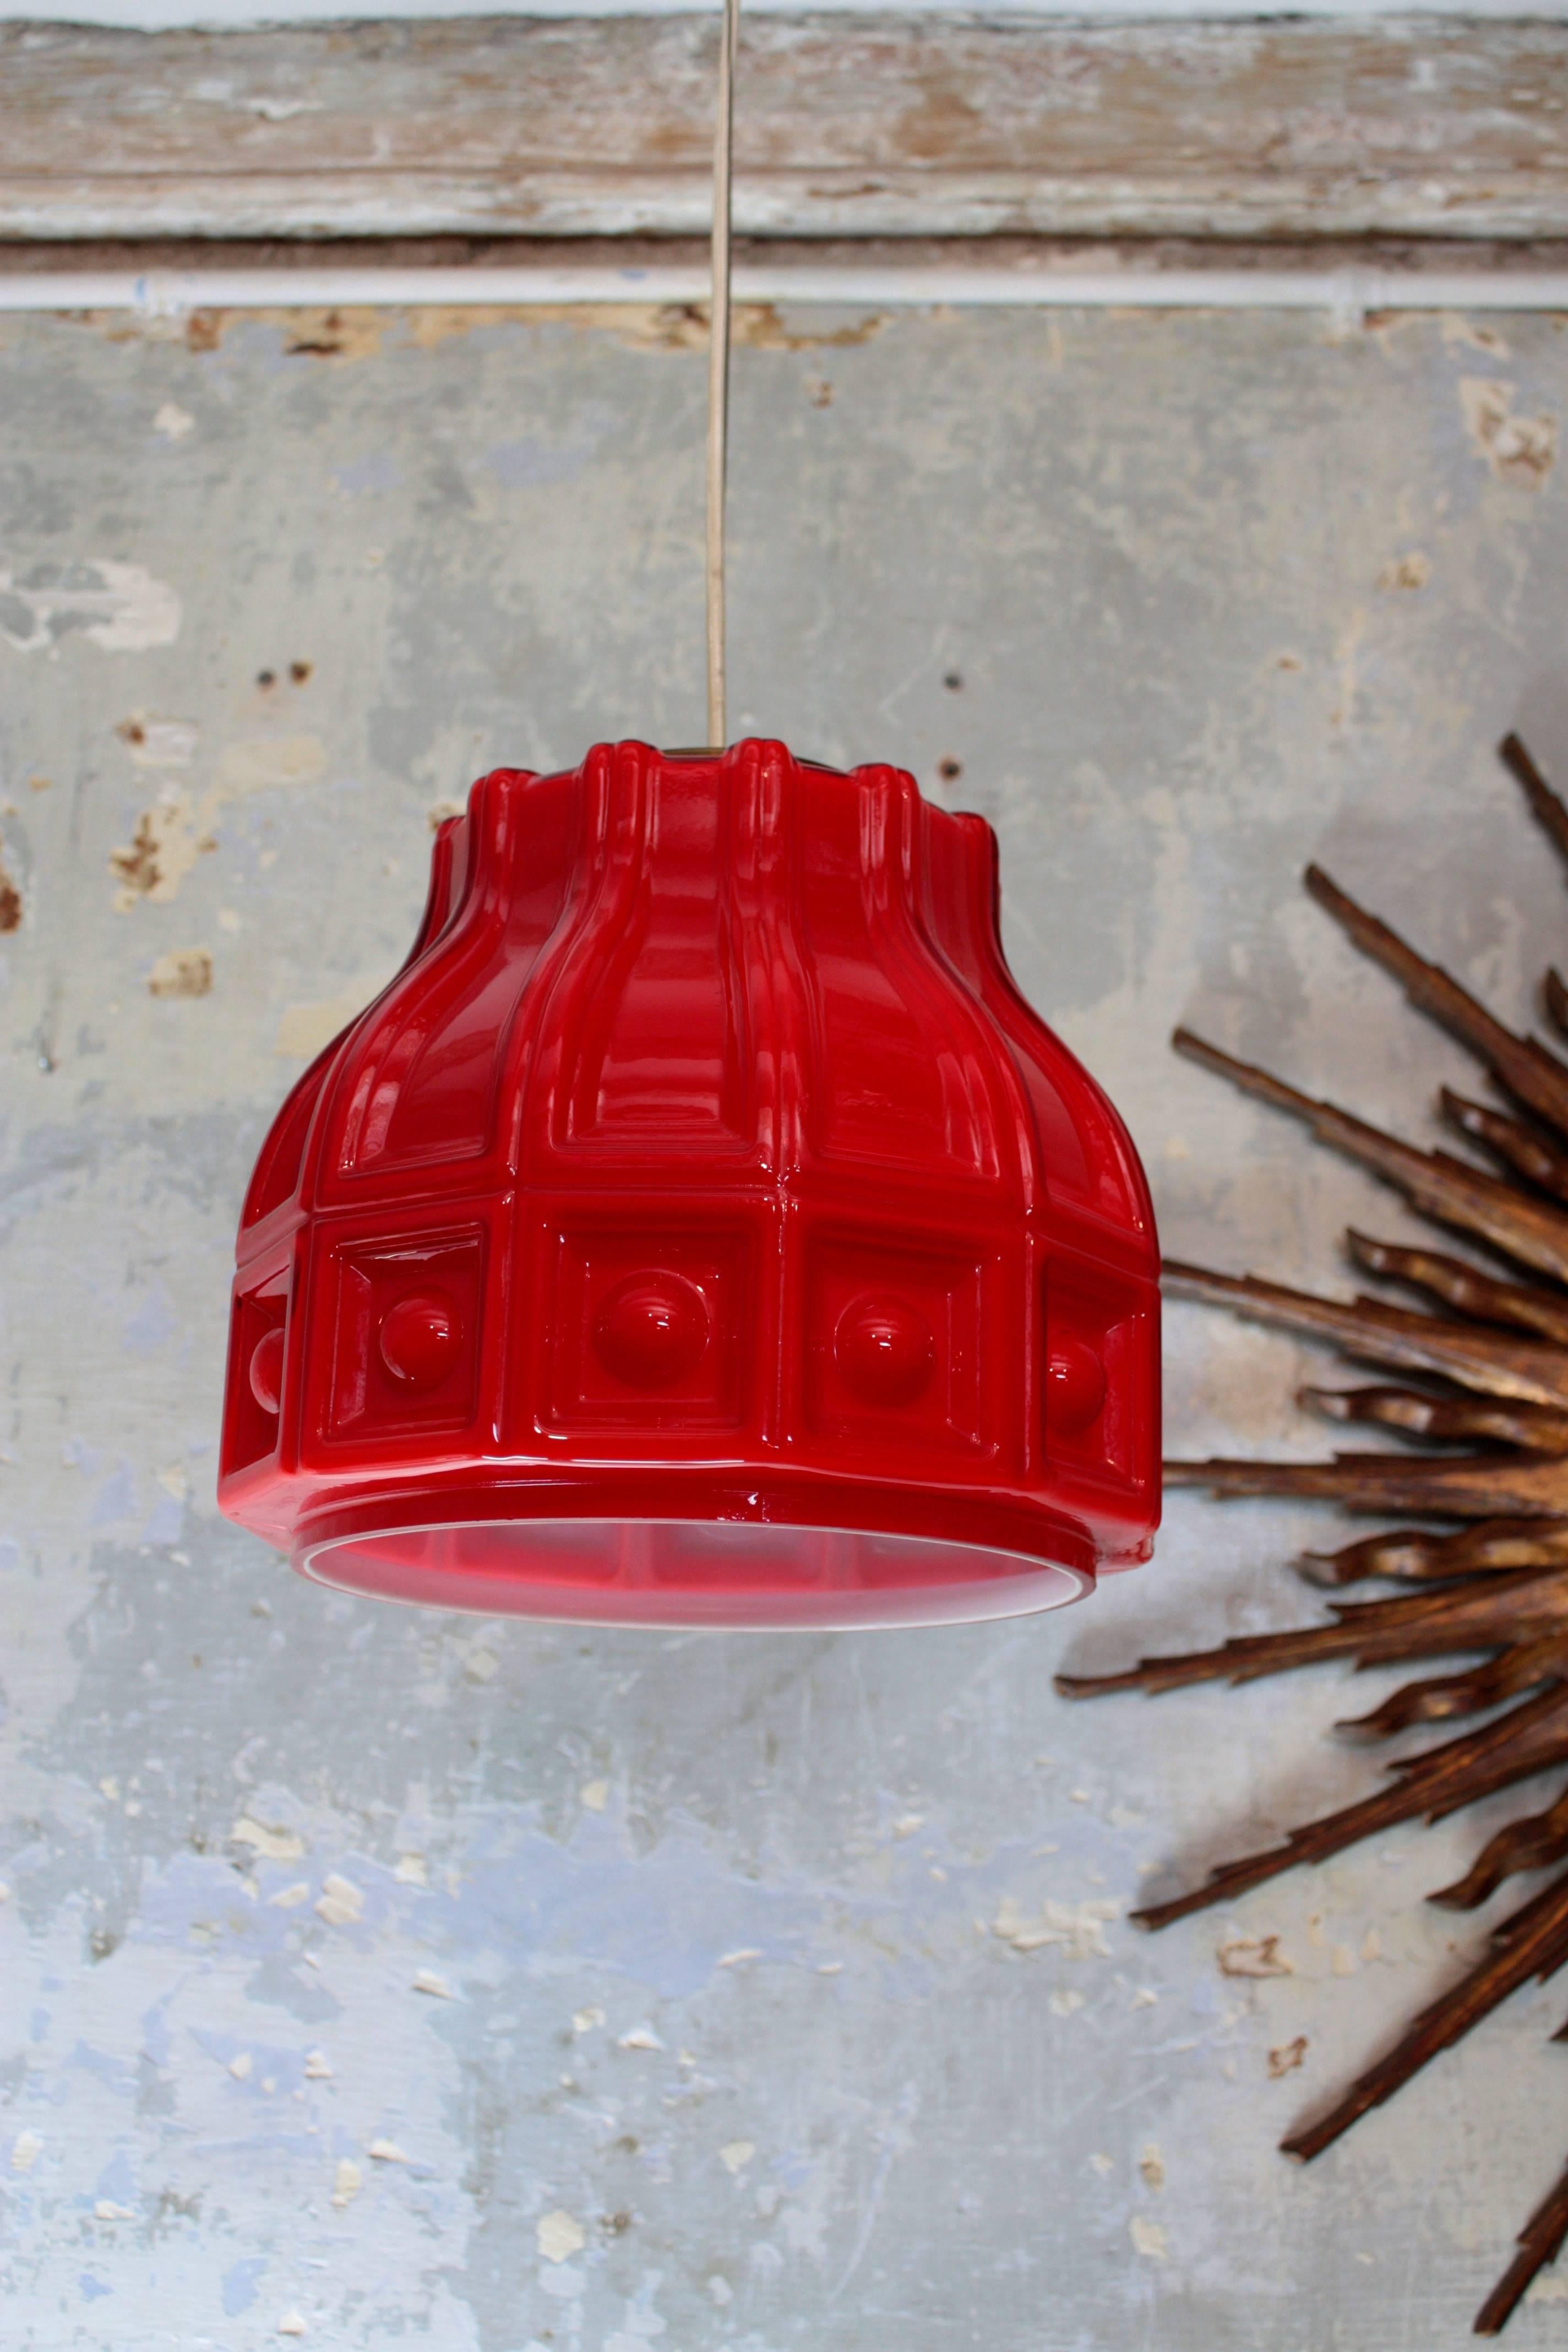 Helena Tynell Midcentury Modern Red Glass Pendant Lamp for Flygsfors. Sweden, 1960s.
Designed by Helena Tynell and Manufactured by Flygsfors, 
Double layers of blown glass, the exterior part in a vibrant red color and the interior part in